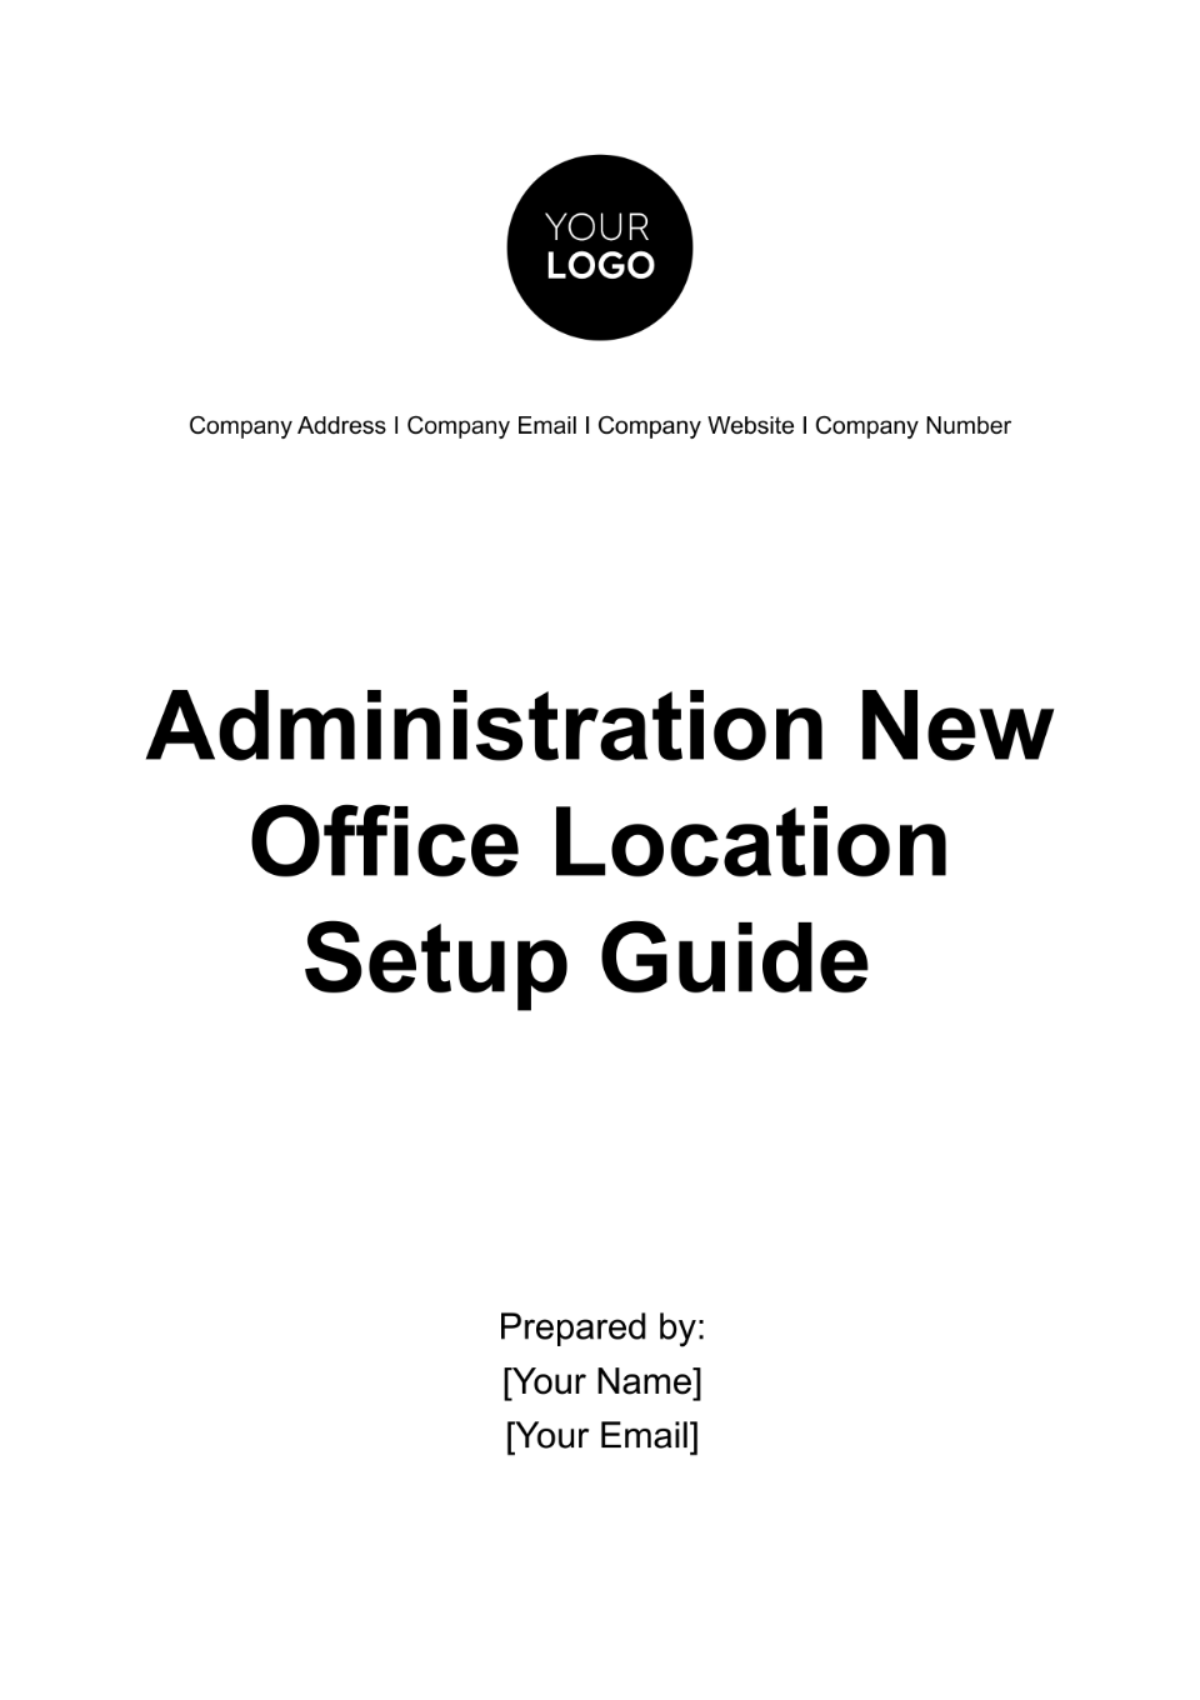 Administration New Office Location Setup Guide Template